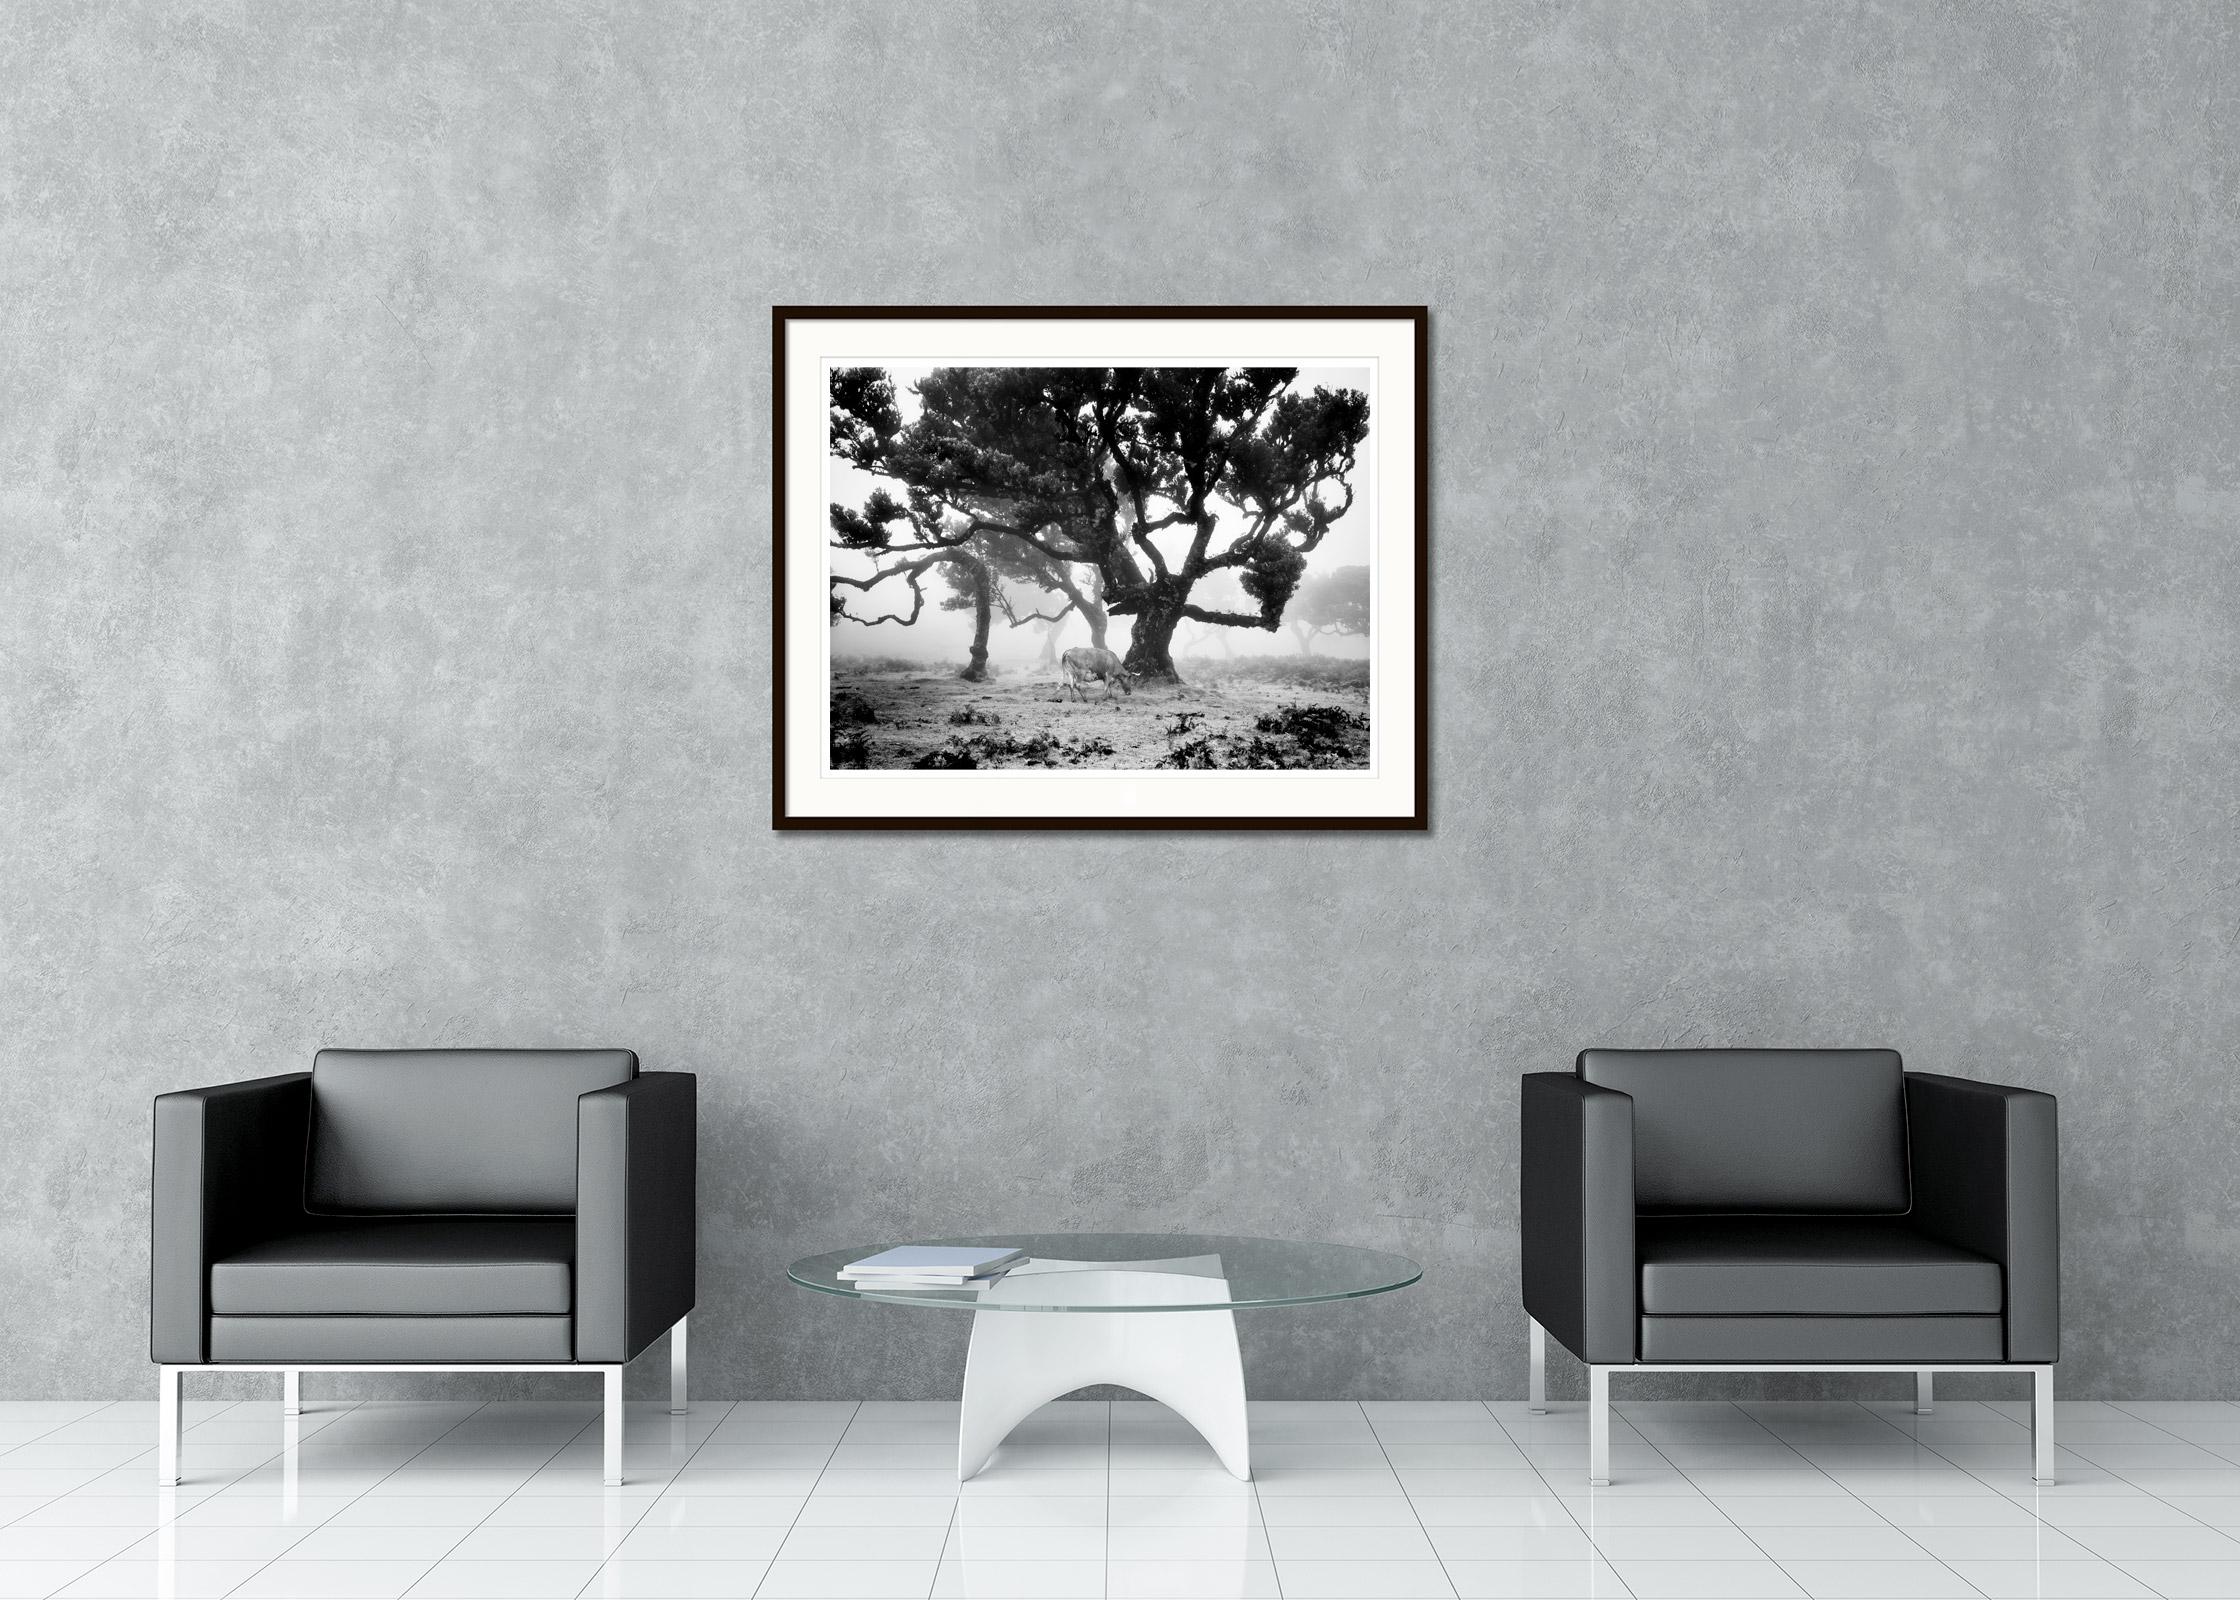 Black and White Fine Art landscape photography. Fairy forest of madeira in the fog with cows and crooked trees, Fanal, Portugal. Archival pigment ink print, edition of 8. Signed, titled, dated and numbered by artist. Certificate of authenticity